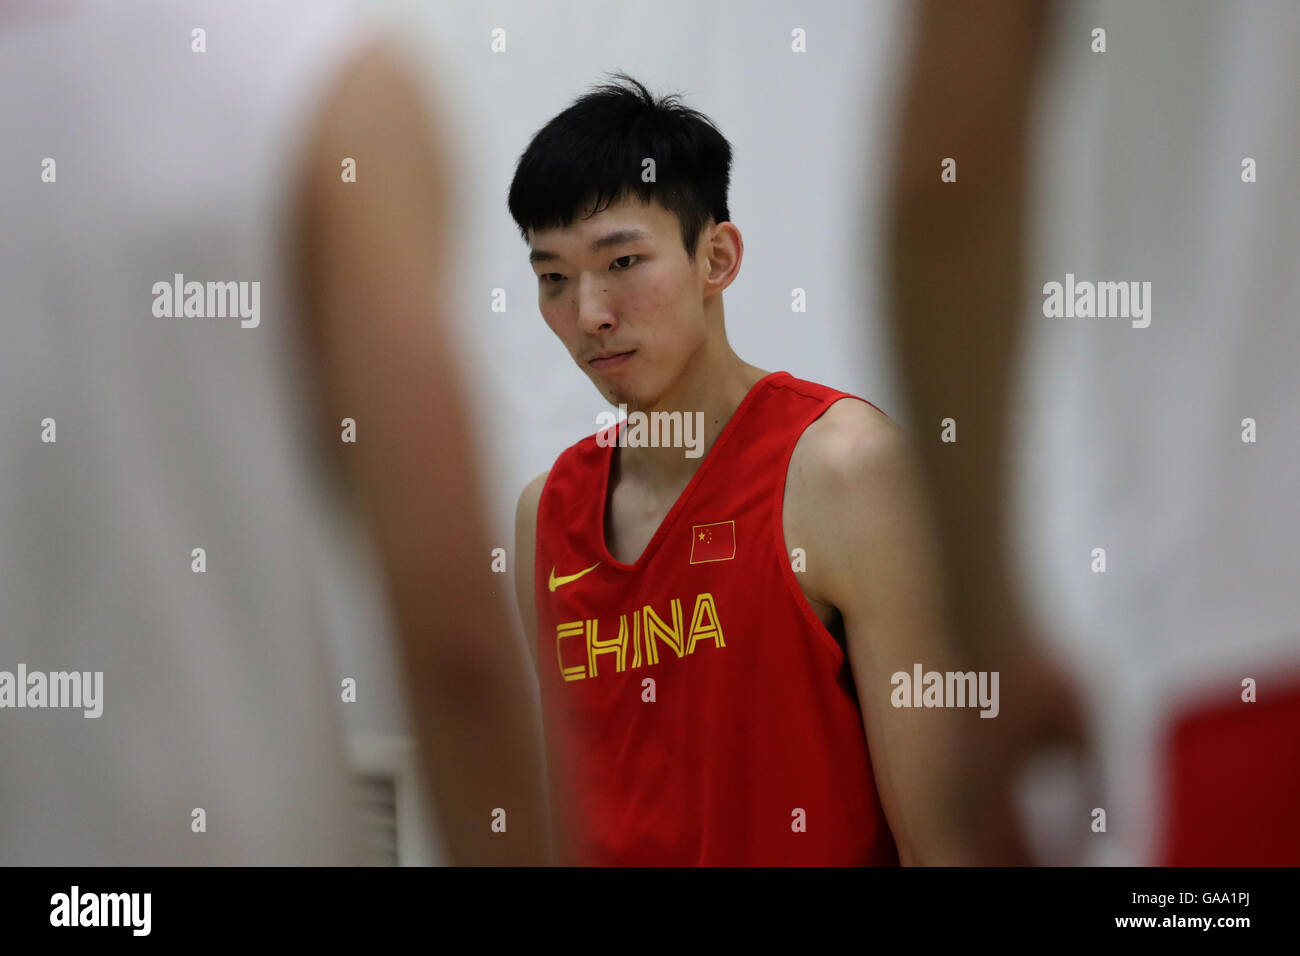 Zhou Qi Appeared At The Airport, Orange T-Shirt And Casual Pants.